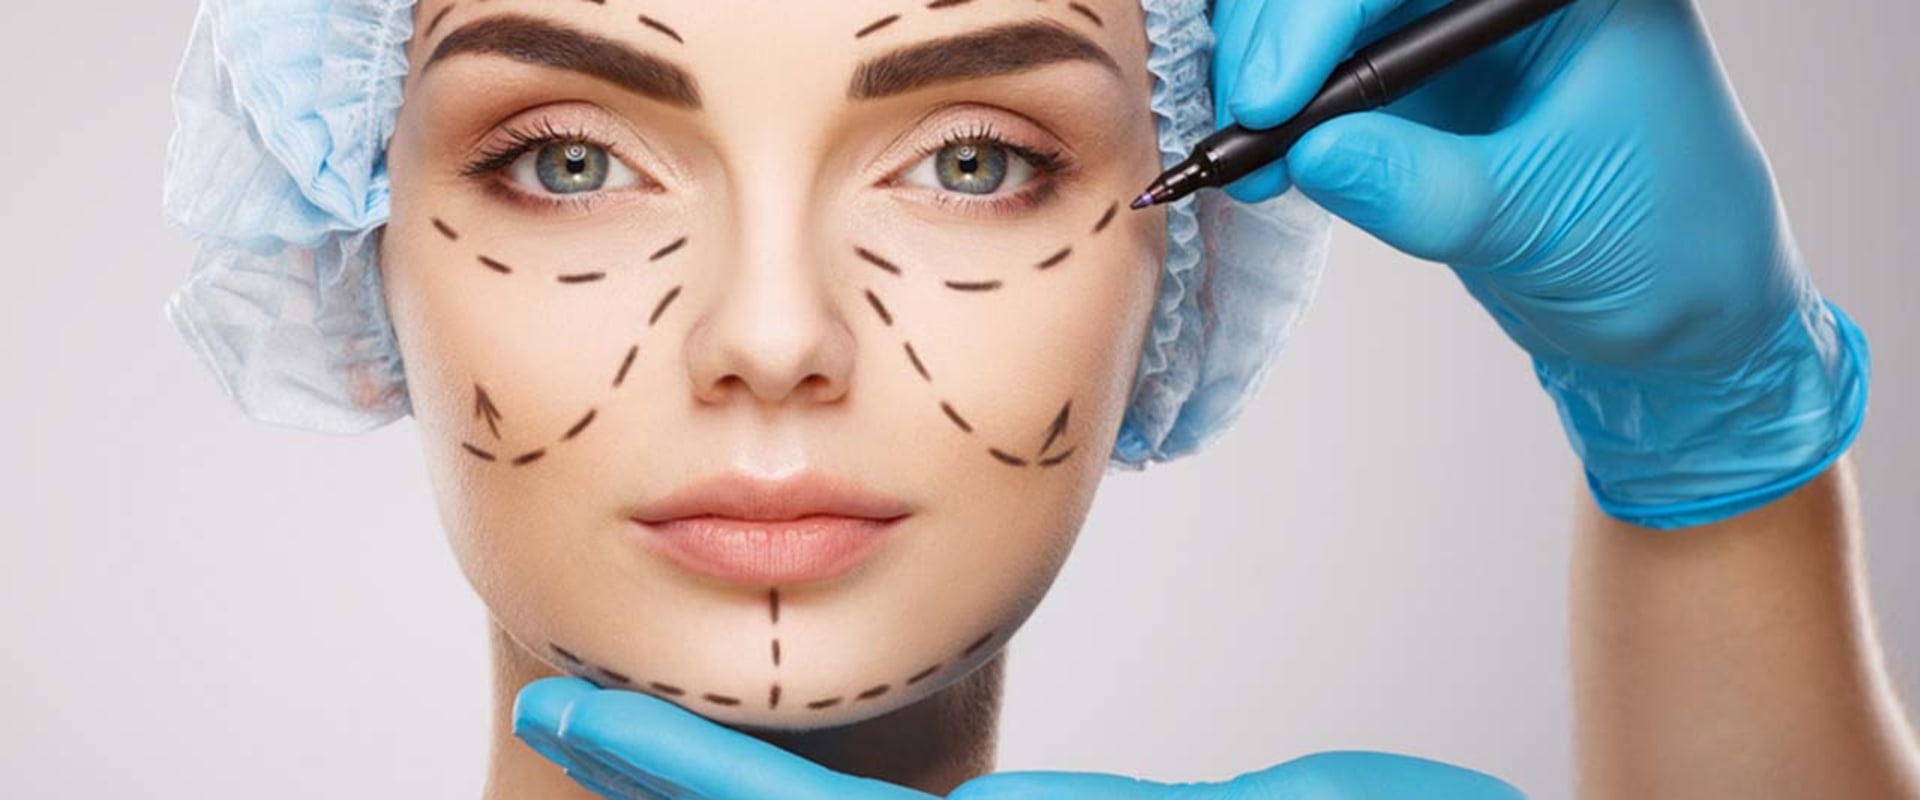 The Pros and Cons of Cosmetic Surgery: What You Need to Know